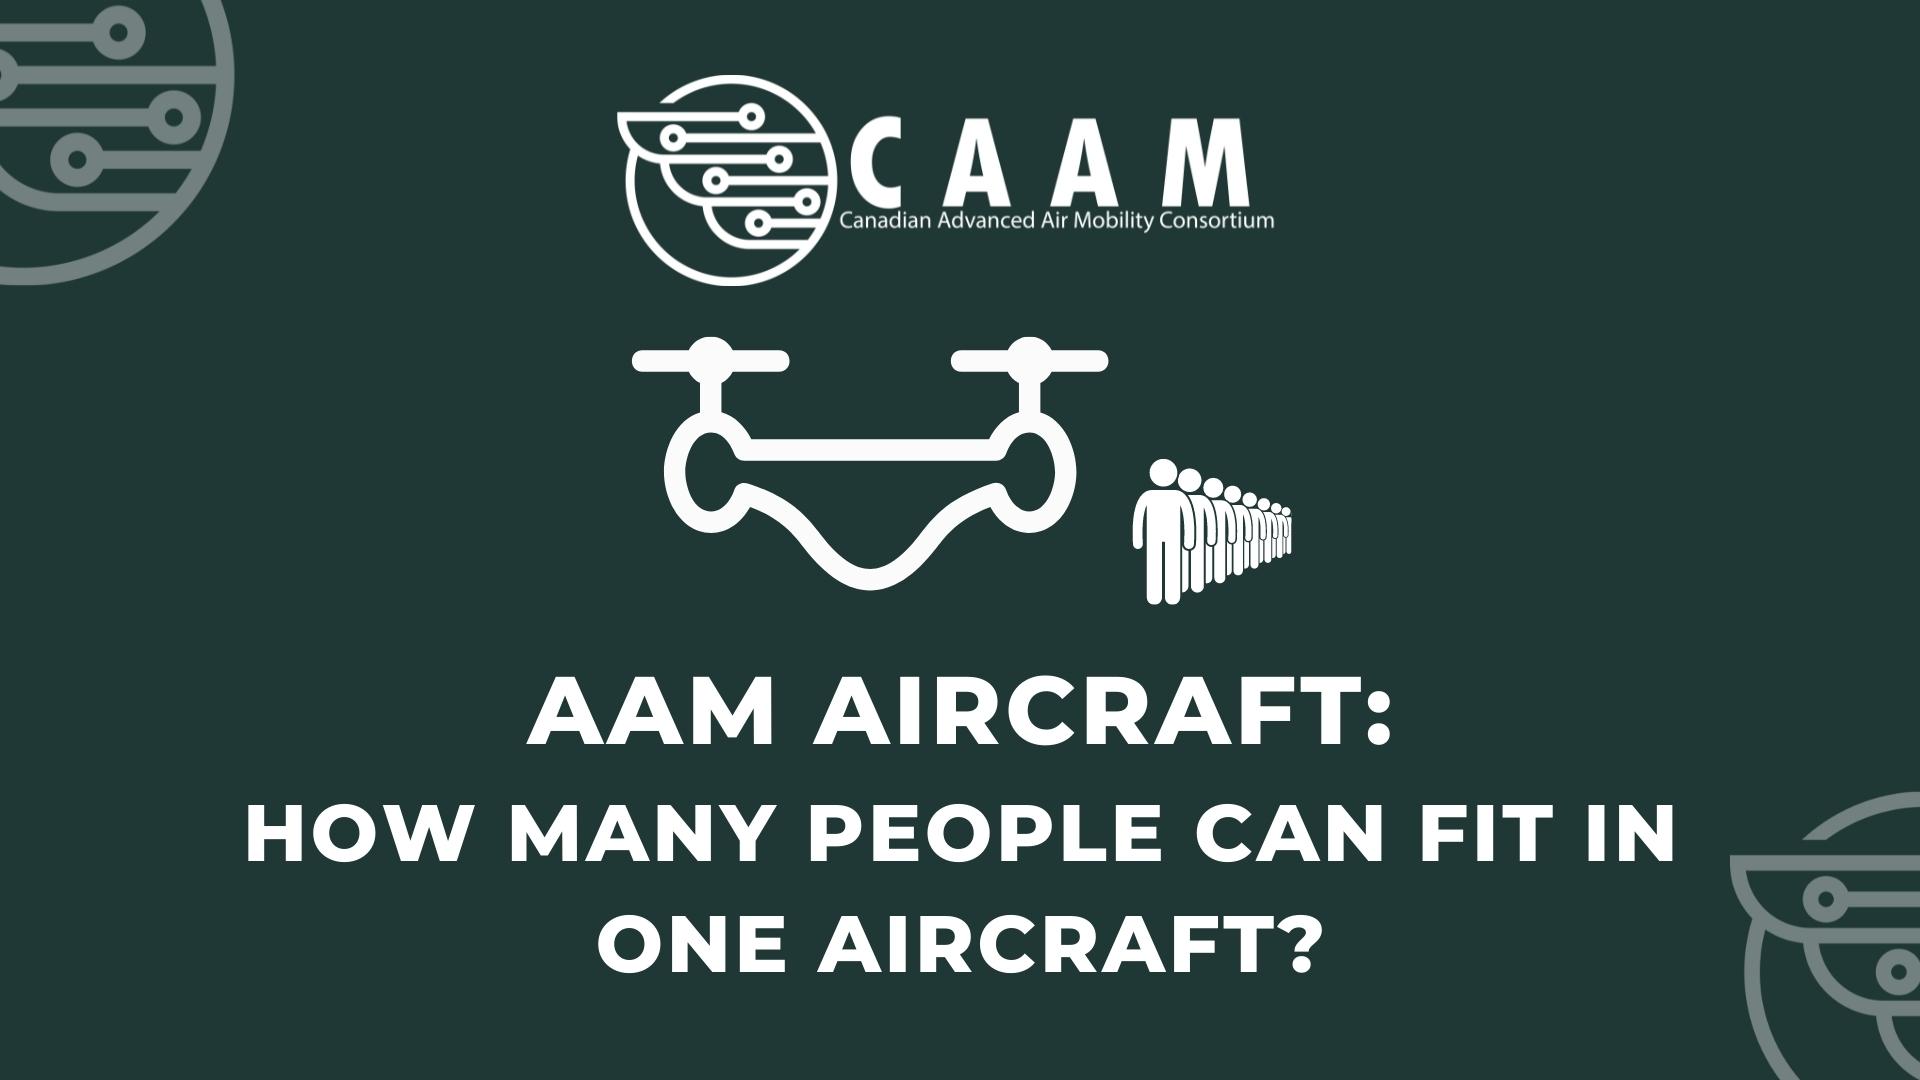 AAM Aircraft - How many people can fit in one aircraft?